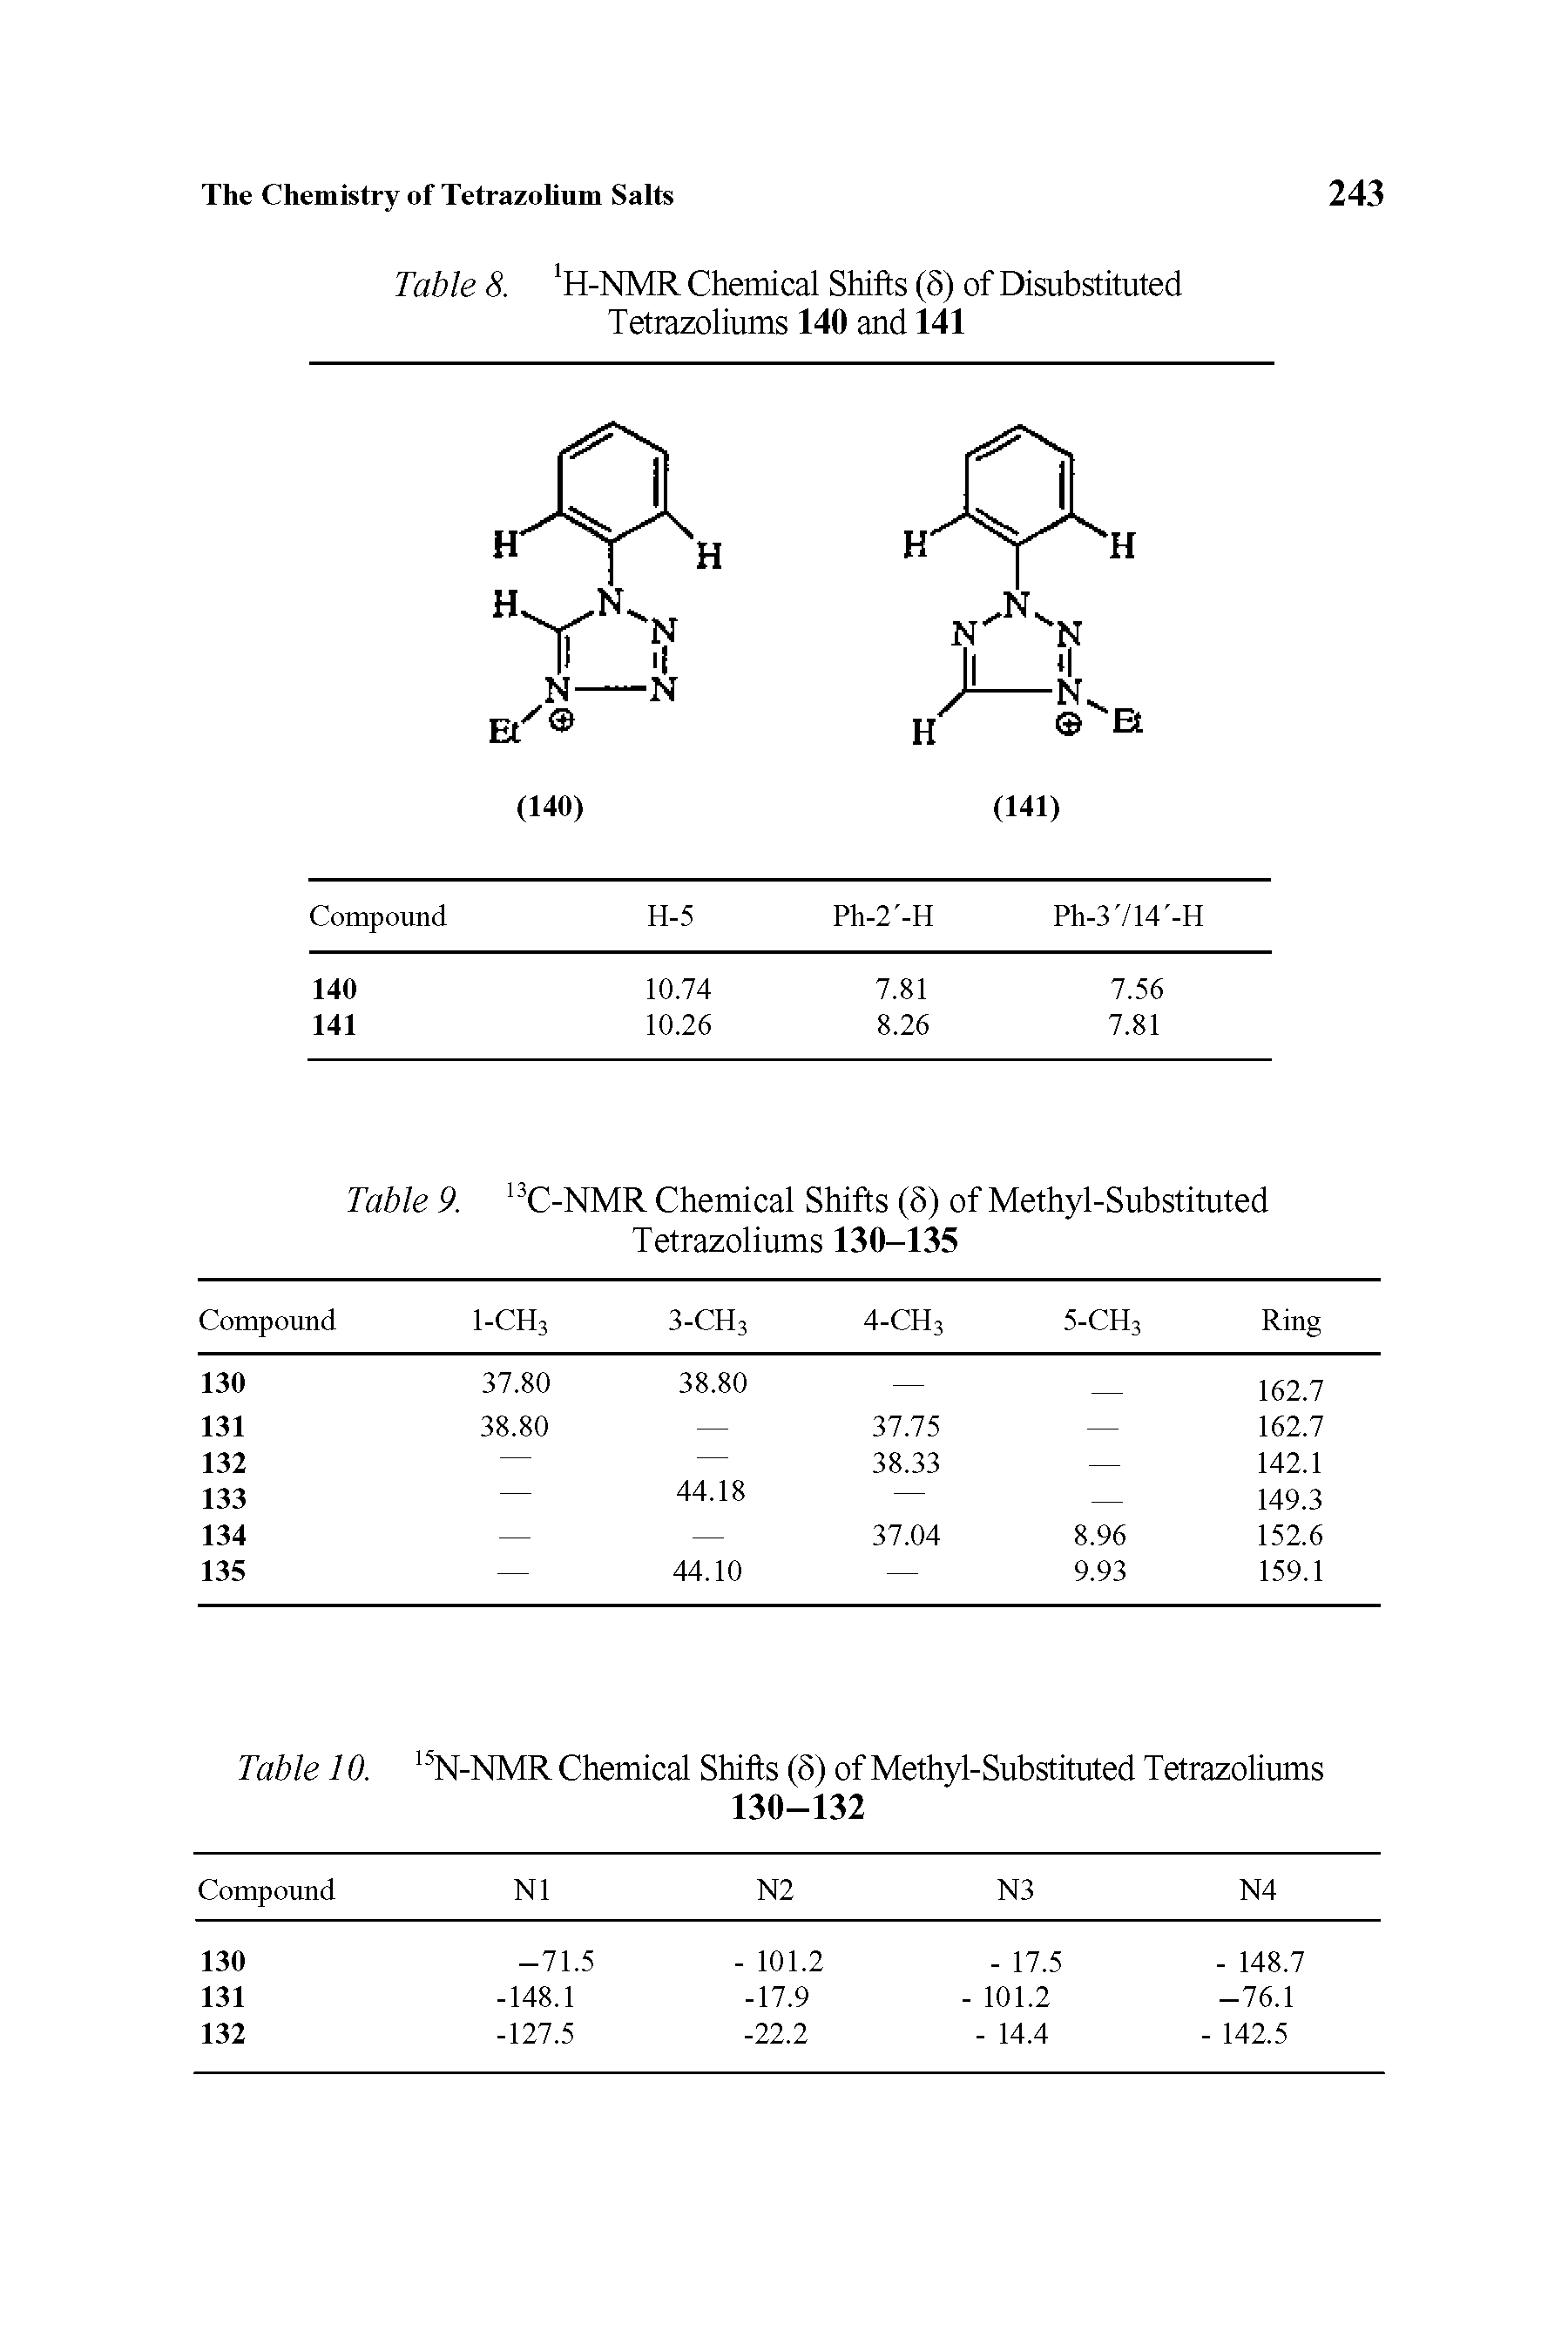 Table 9. 13C-NMR Chemical Shifts (5) of Methyl-Substituted Tetrazoliums 130-135...